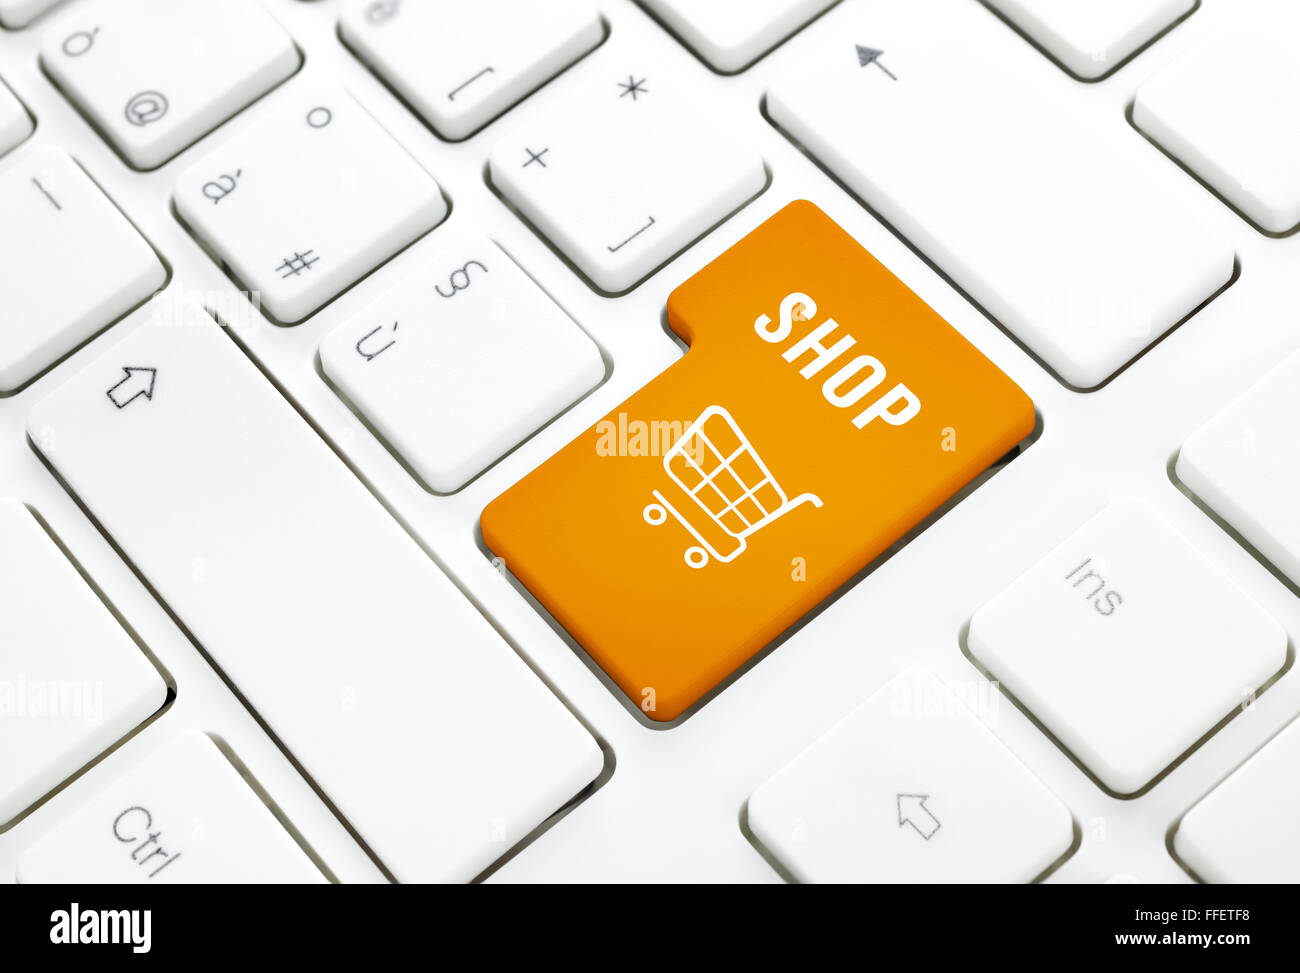 Shop business concept, Orange shopping cart button or key on white keyboard photography. Stock Photo